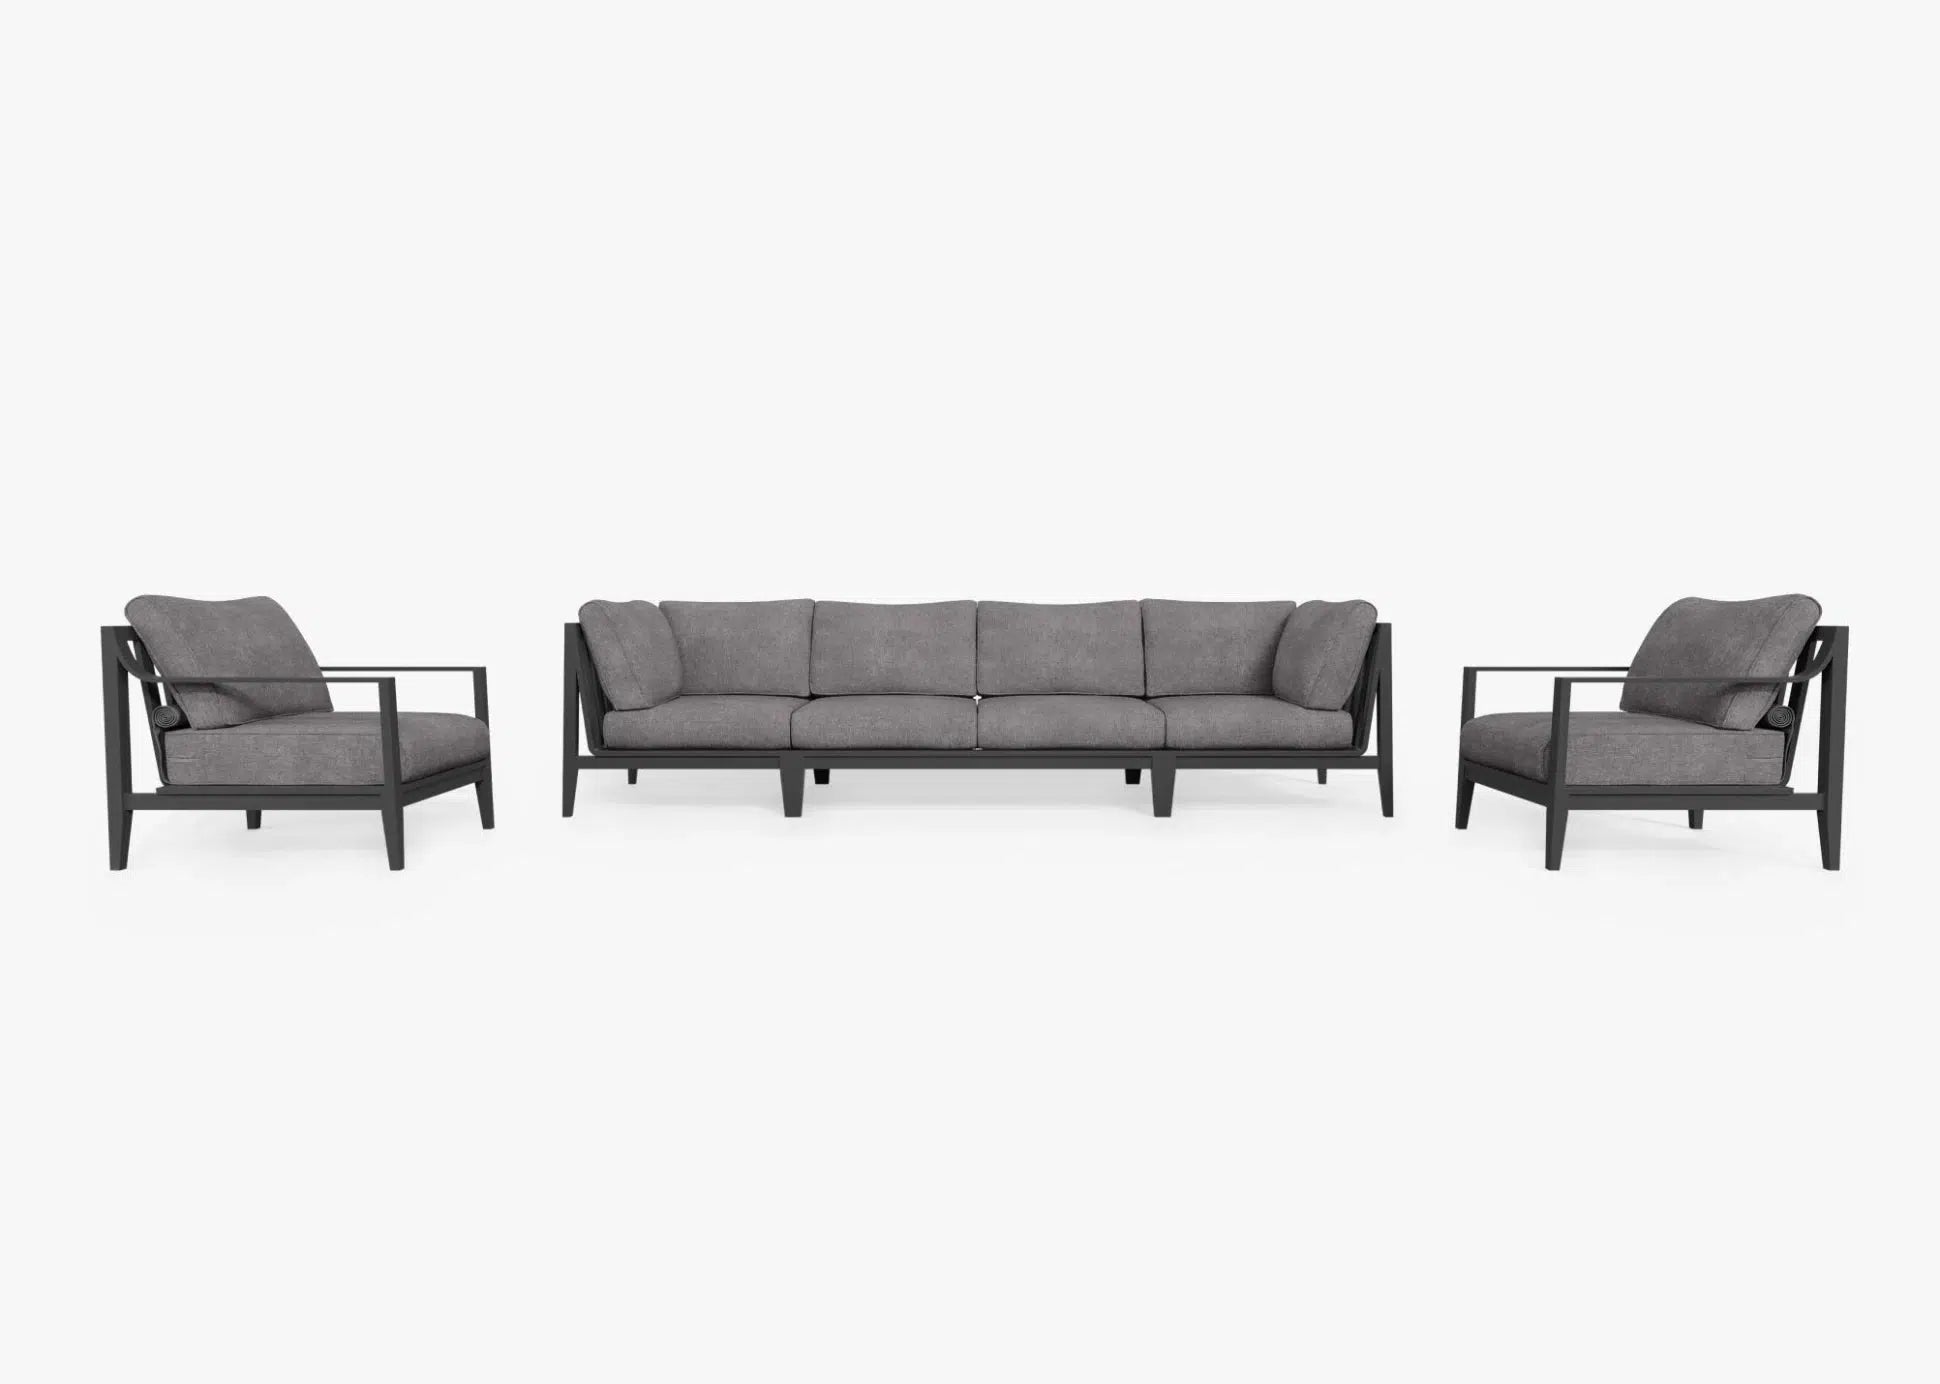 Live Outer 127" Charcoal Aluminum Outdoor Sofa With Armchairs and Dark Pebble Gray Cushion (6-Seat)